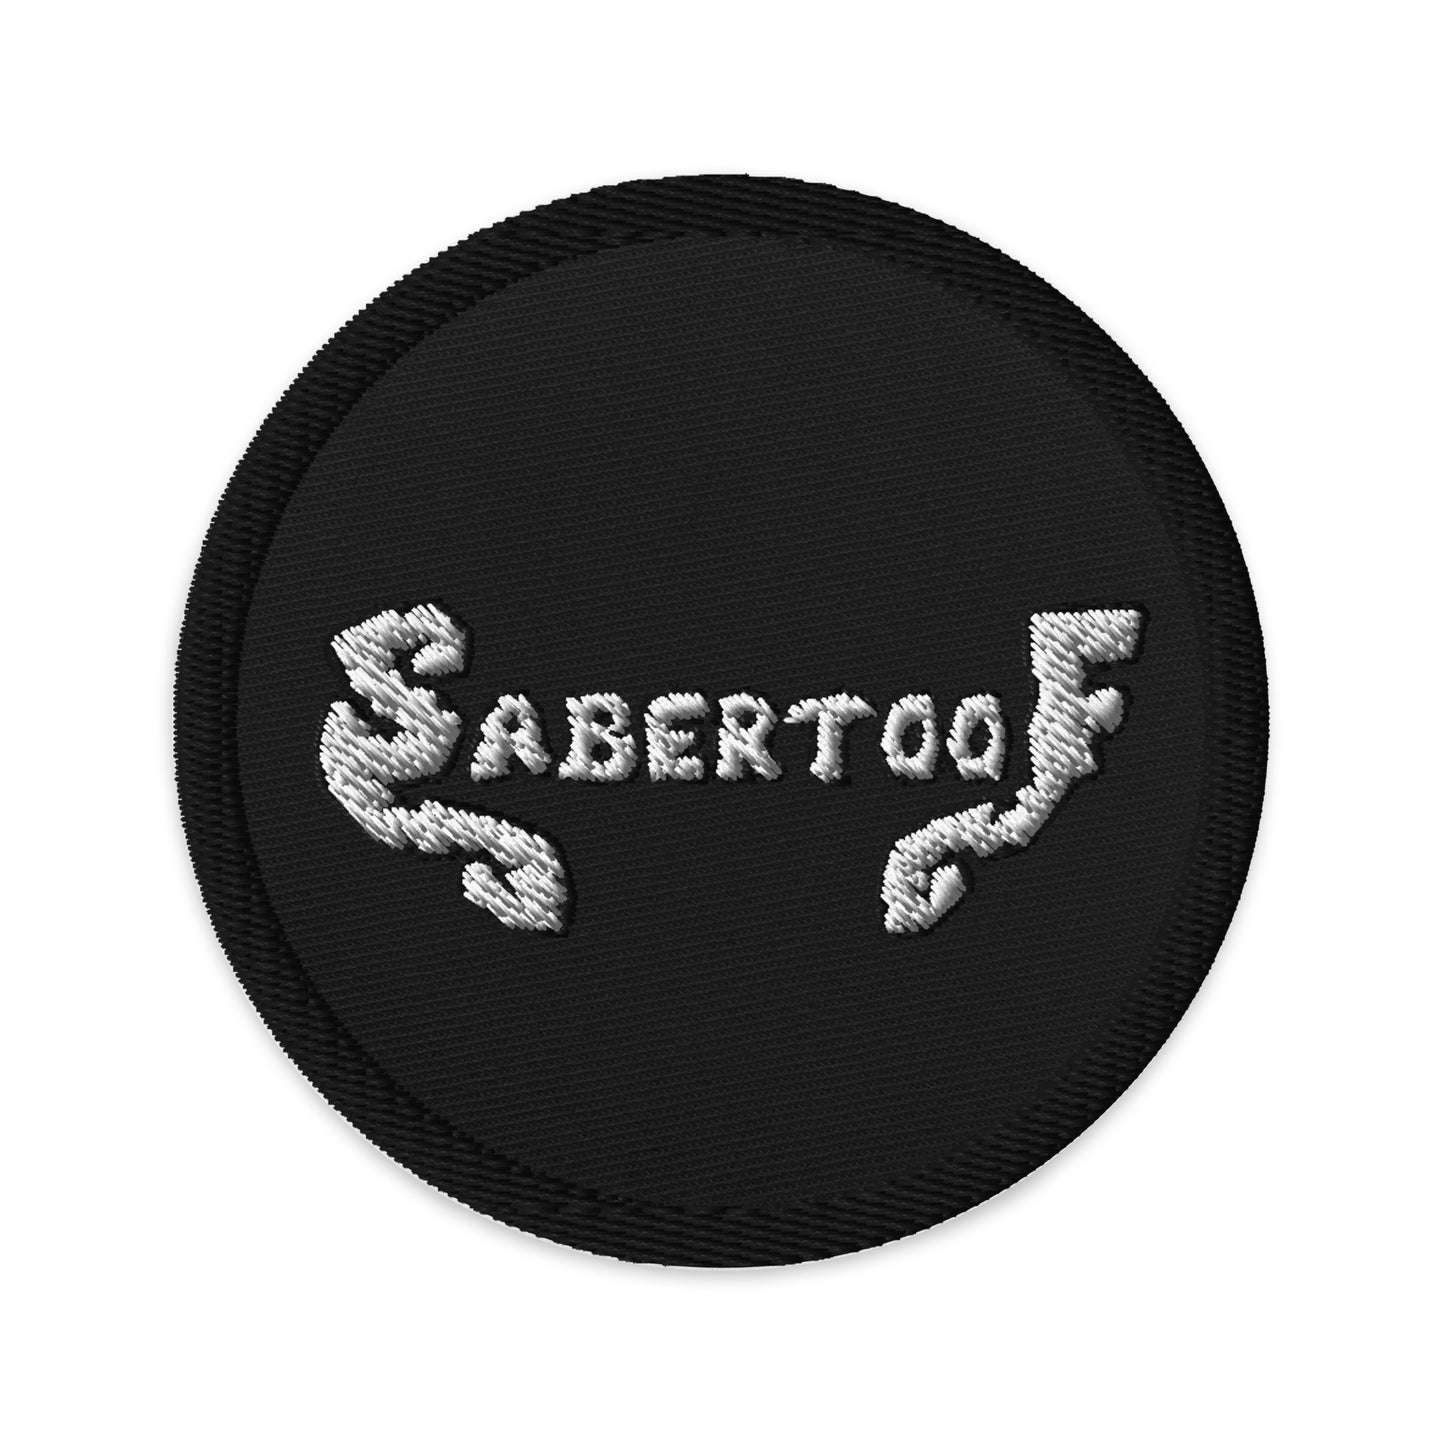 Sabertoof- Embroidered patches